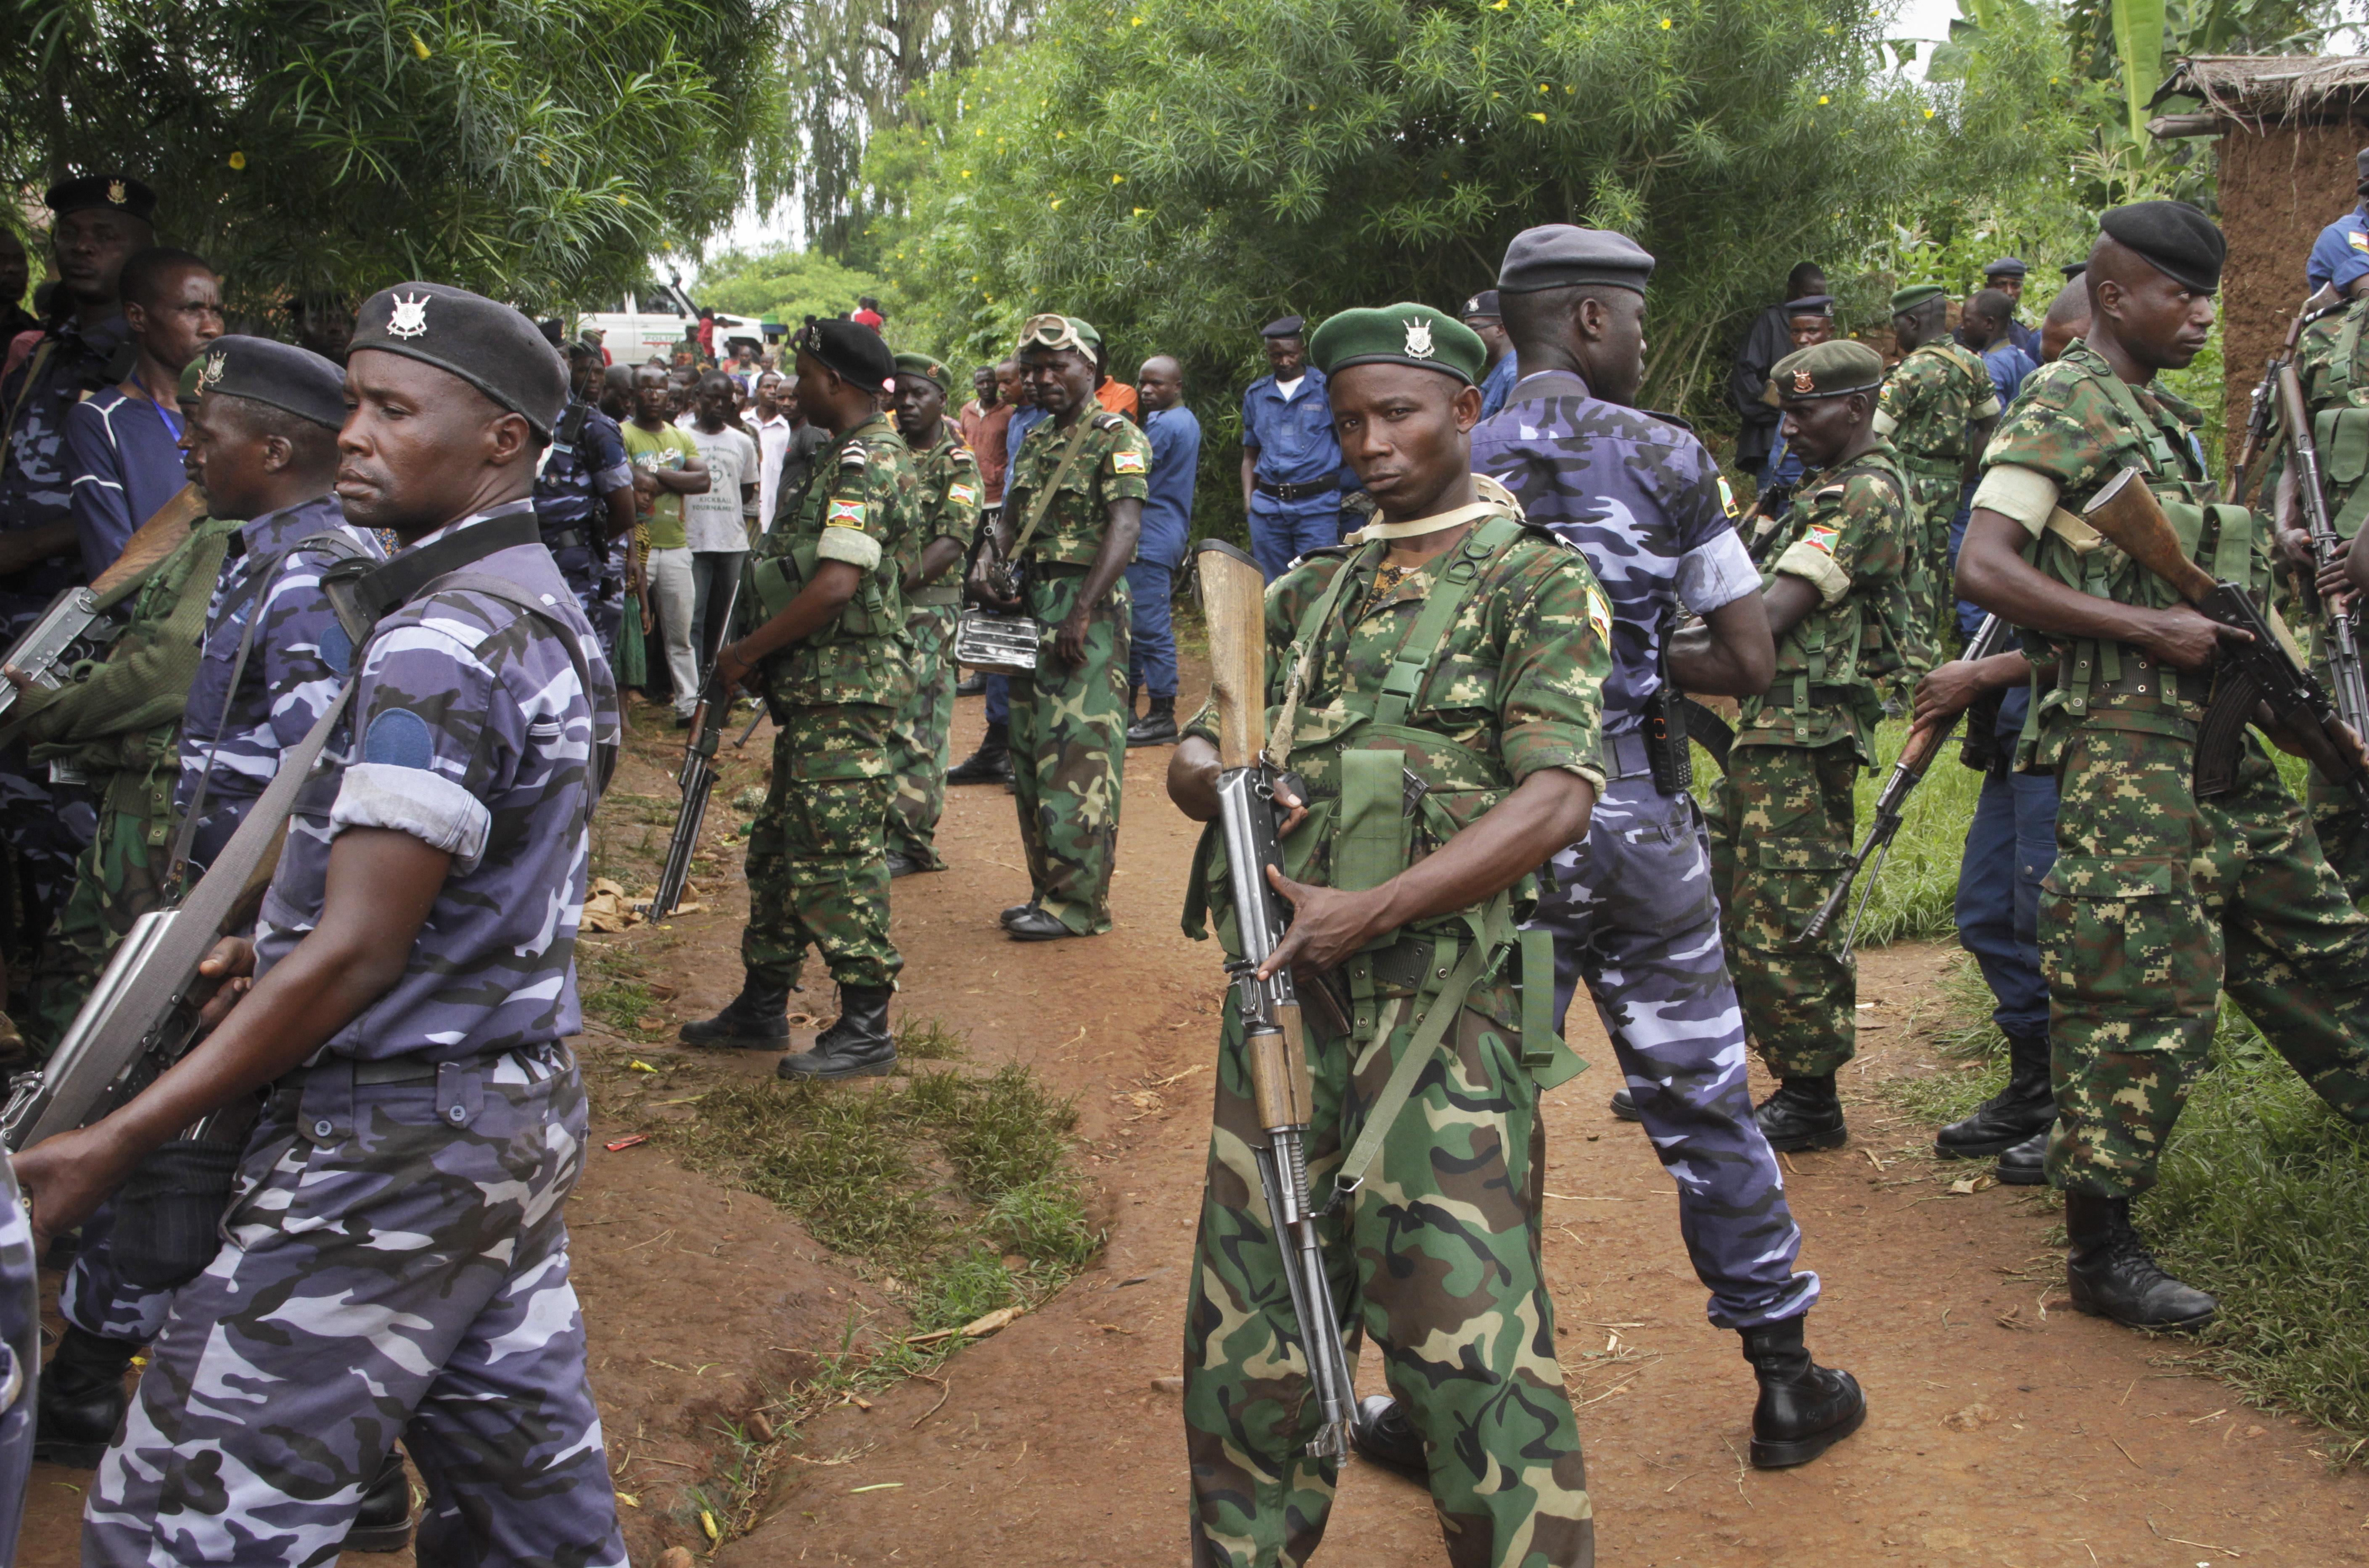 Official: 26 people killed in Burundi ‘terrorist’ attack | The ...